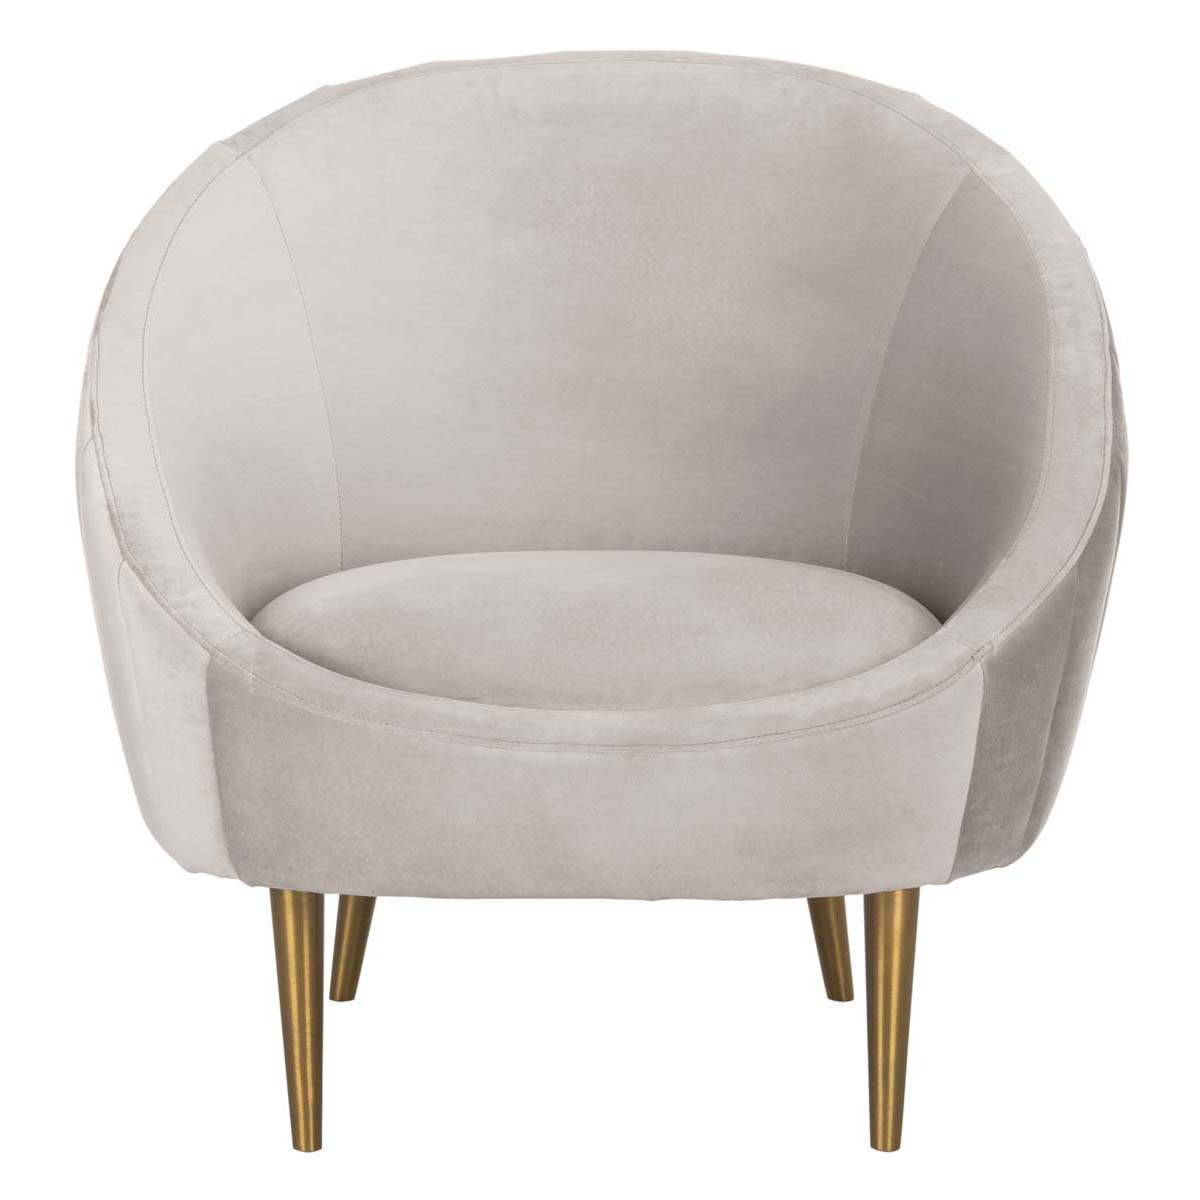 Safavieh Couture Razia Channel Tufted Tub Chair - Pale Taupe